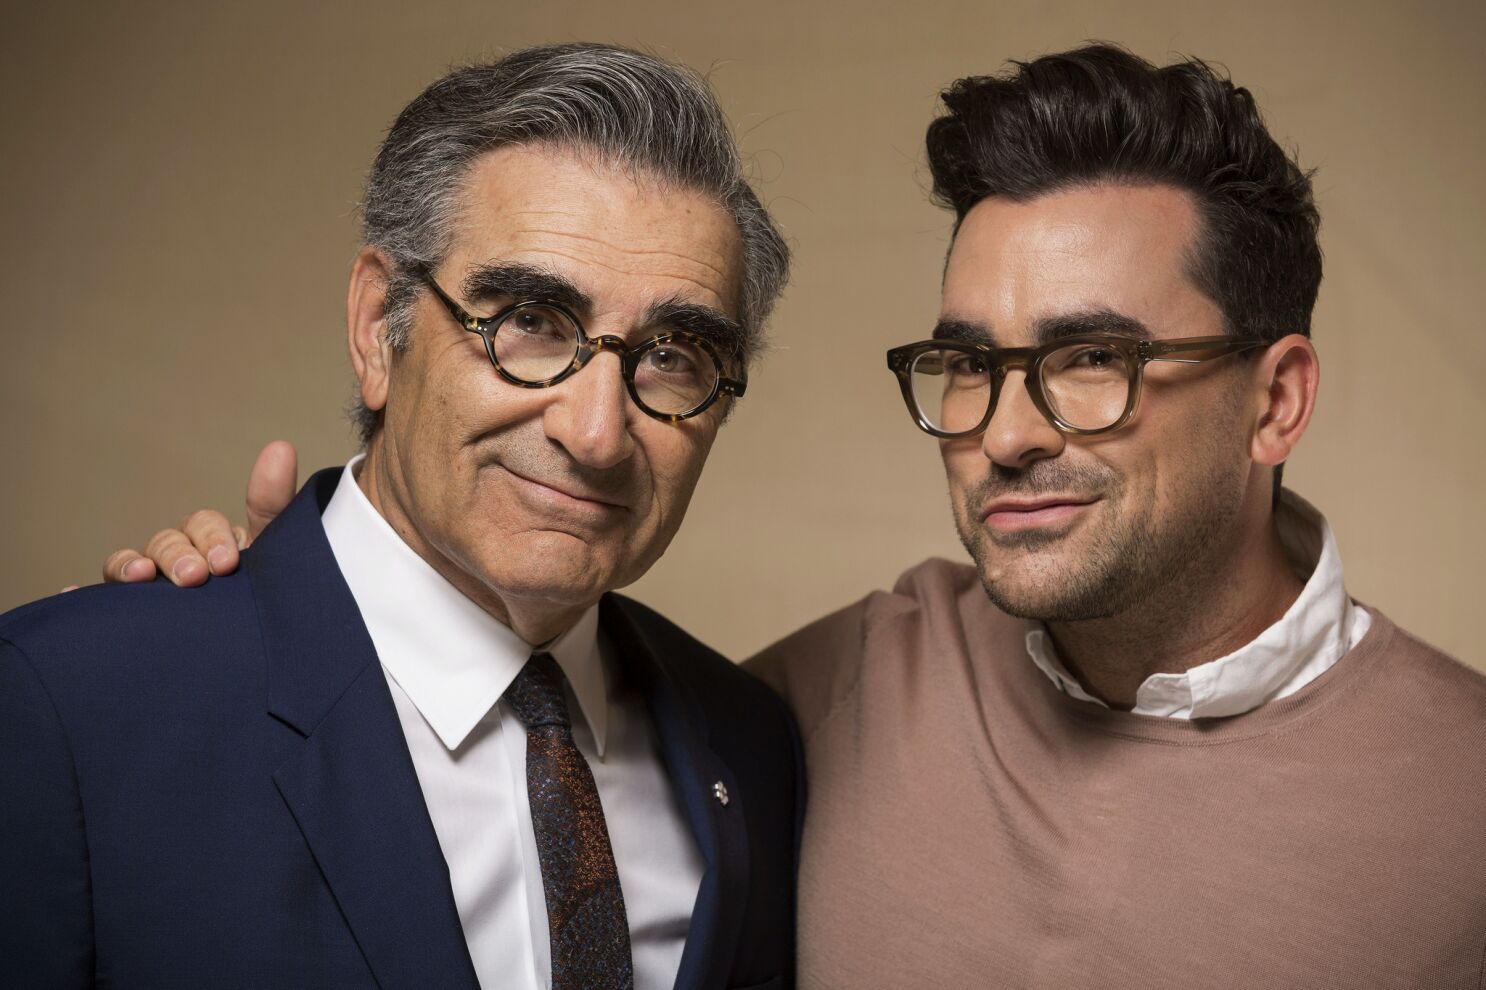 Further up the 'Creek': Eugene and Dan Levy talk more about Canadian comedy  - Los Angeles Times